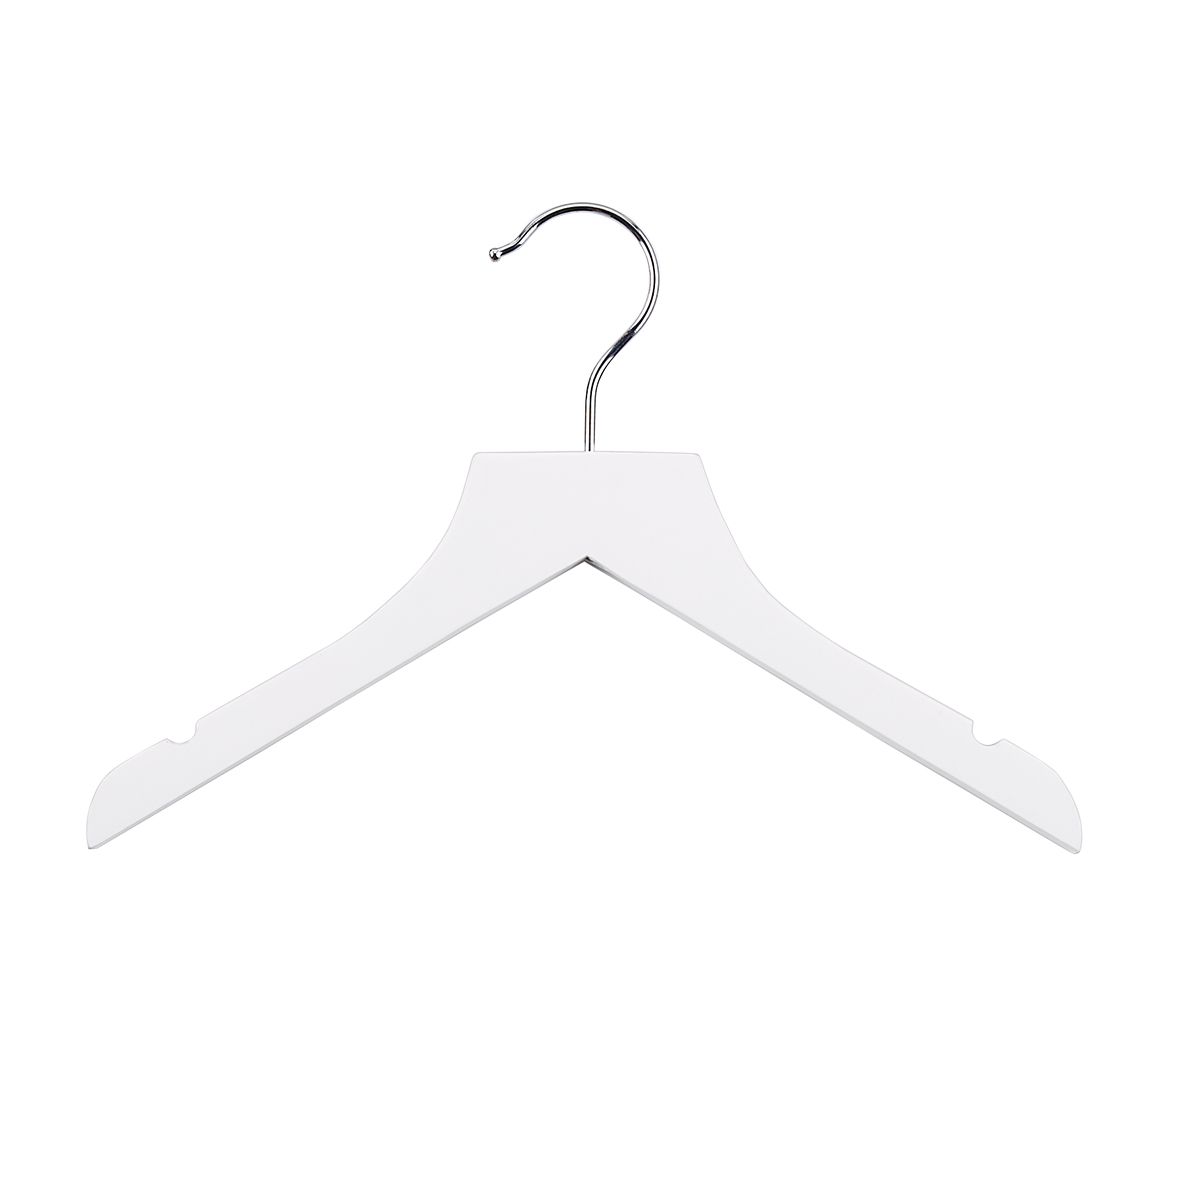 Kid's Wooden Shirt Hangers with Chrome Hardware | The Container Store